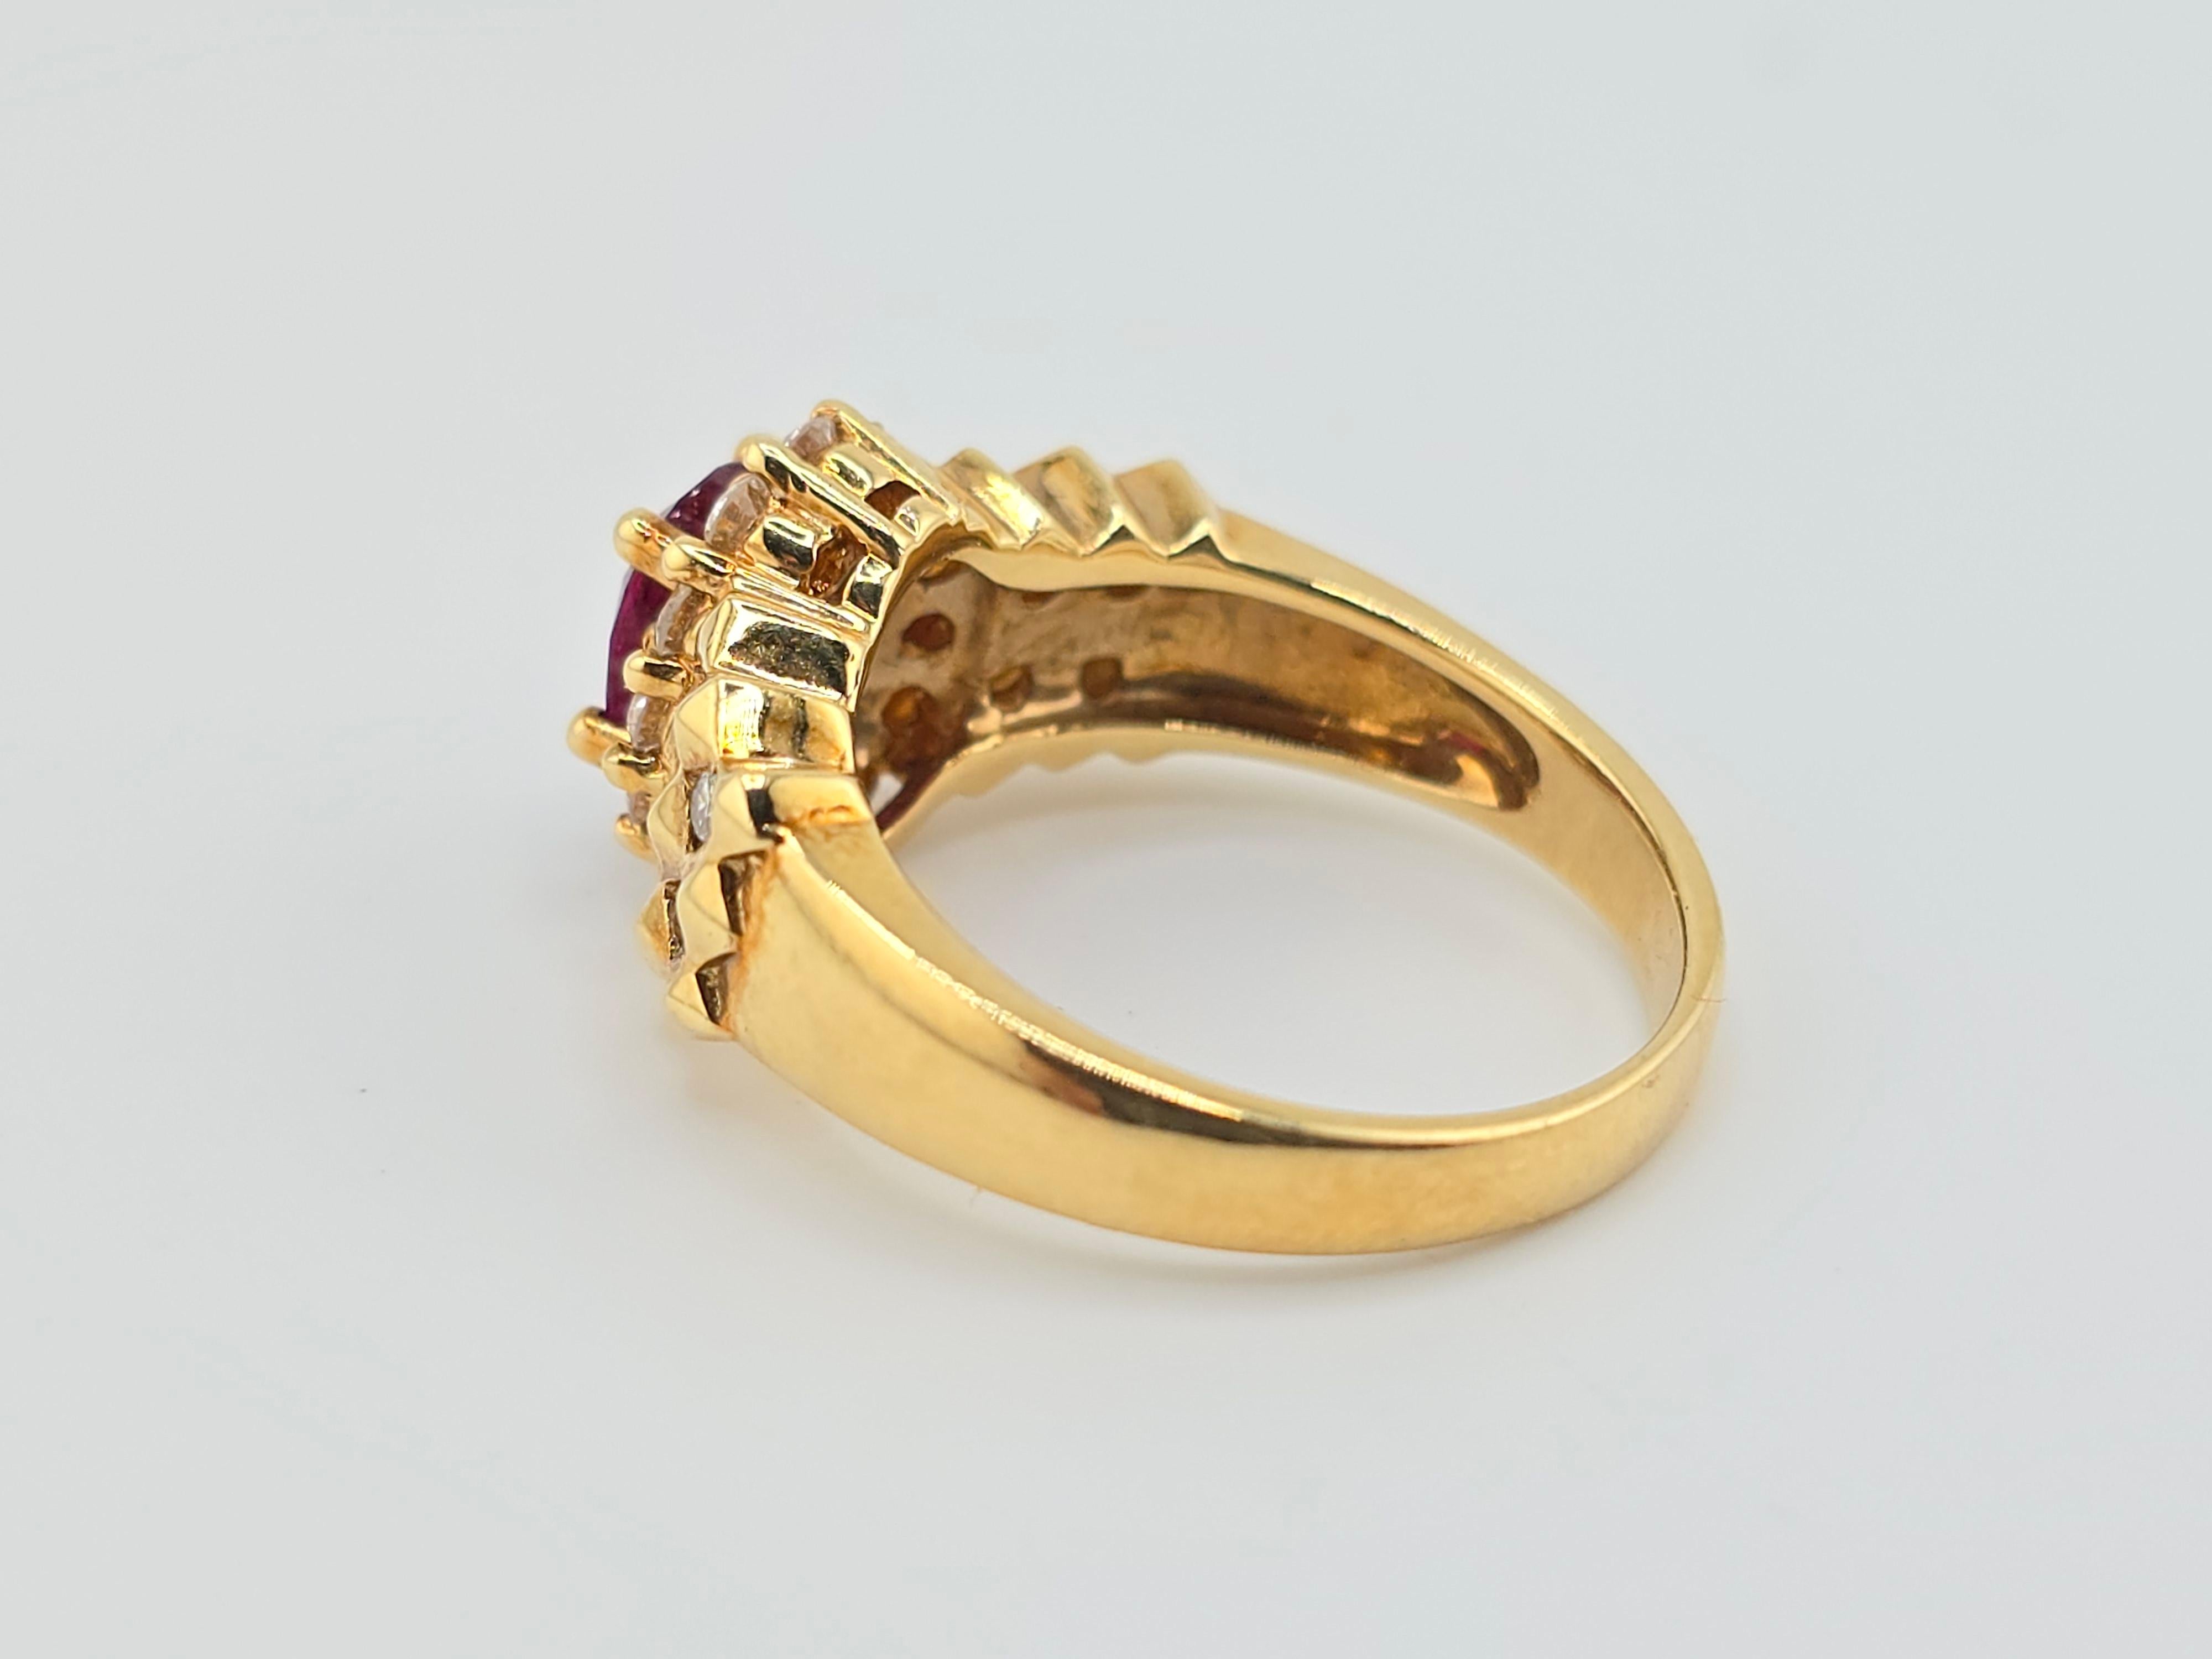 Fabulous Vivid Ruby & Diamond 18K Yellow Gold Ring Gorgeous Diamonds In Good Condition For Sale In Media, PA